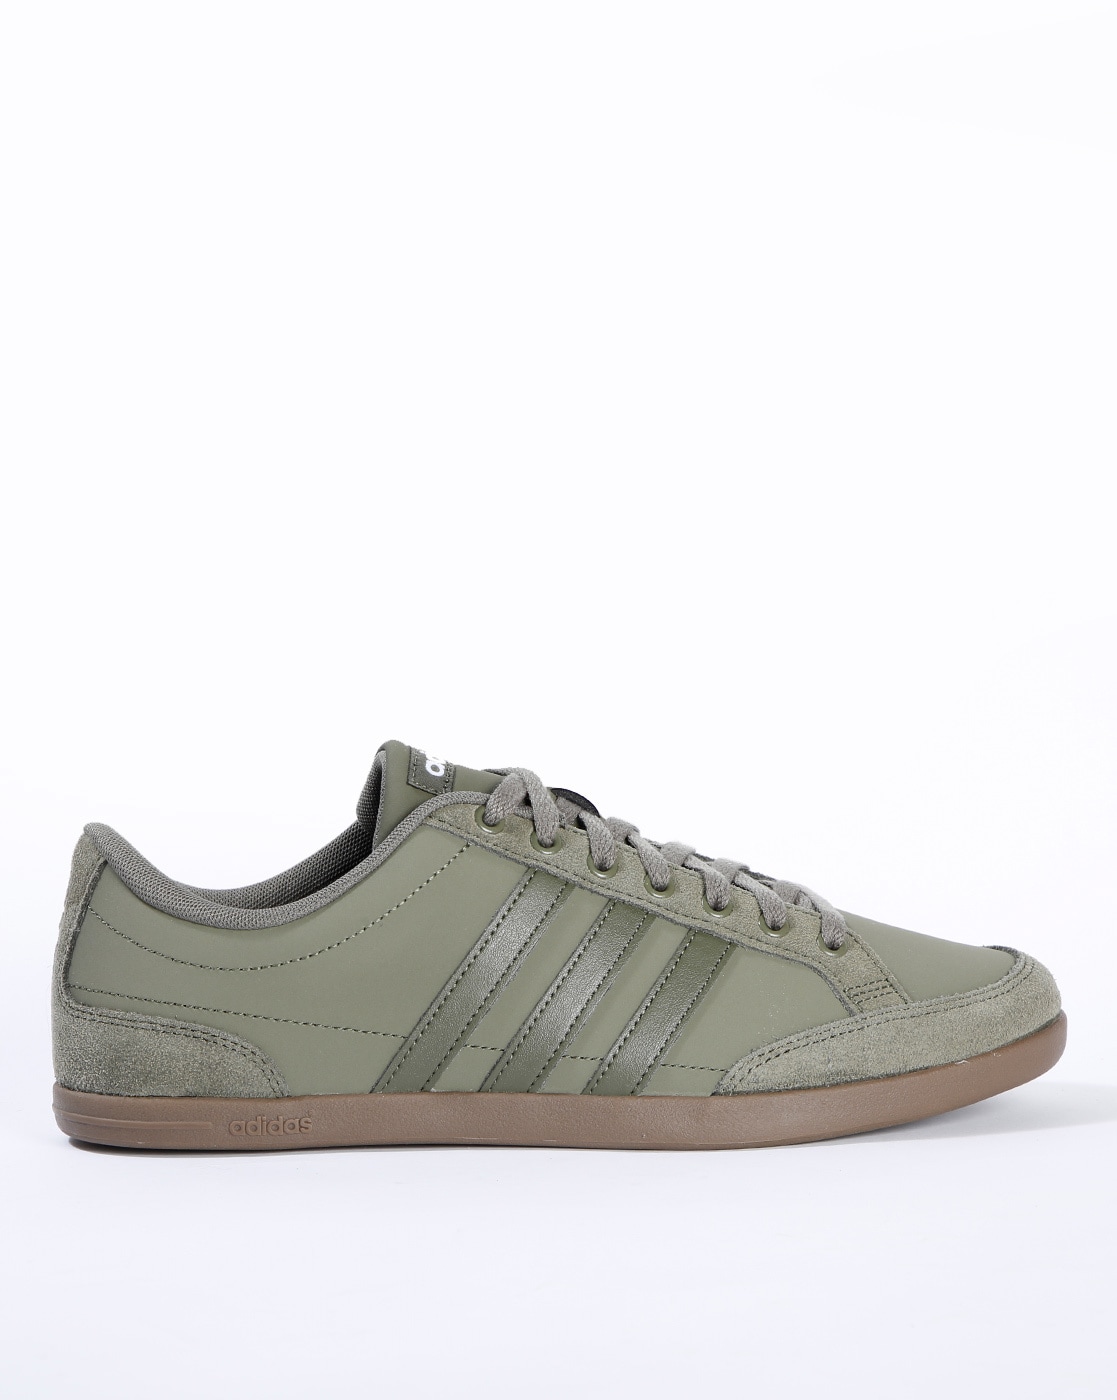 adidas olive green shoes